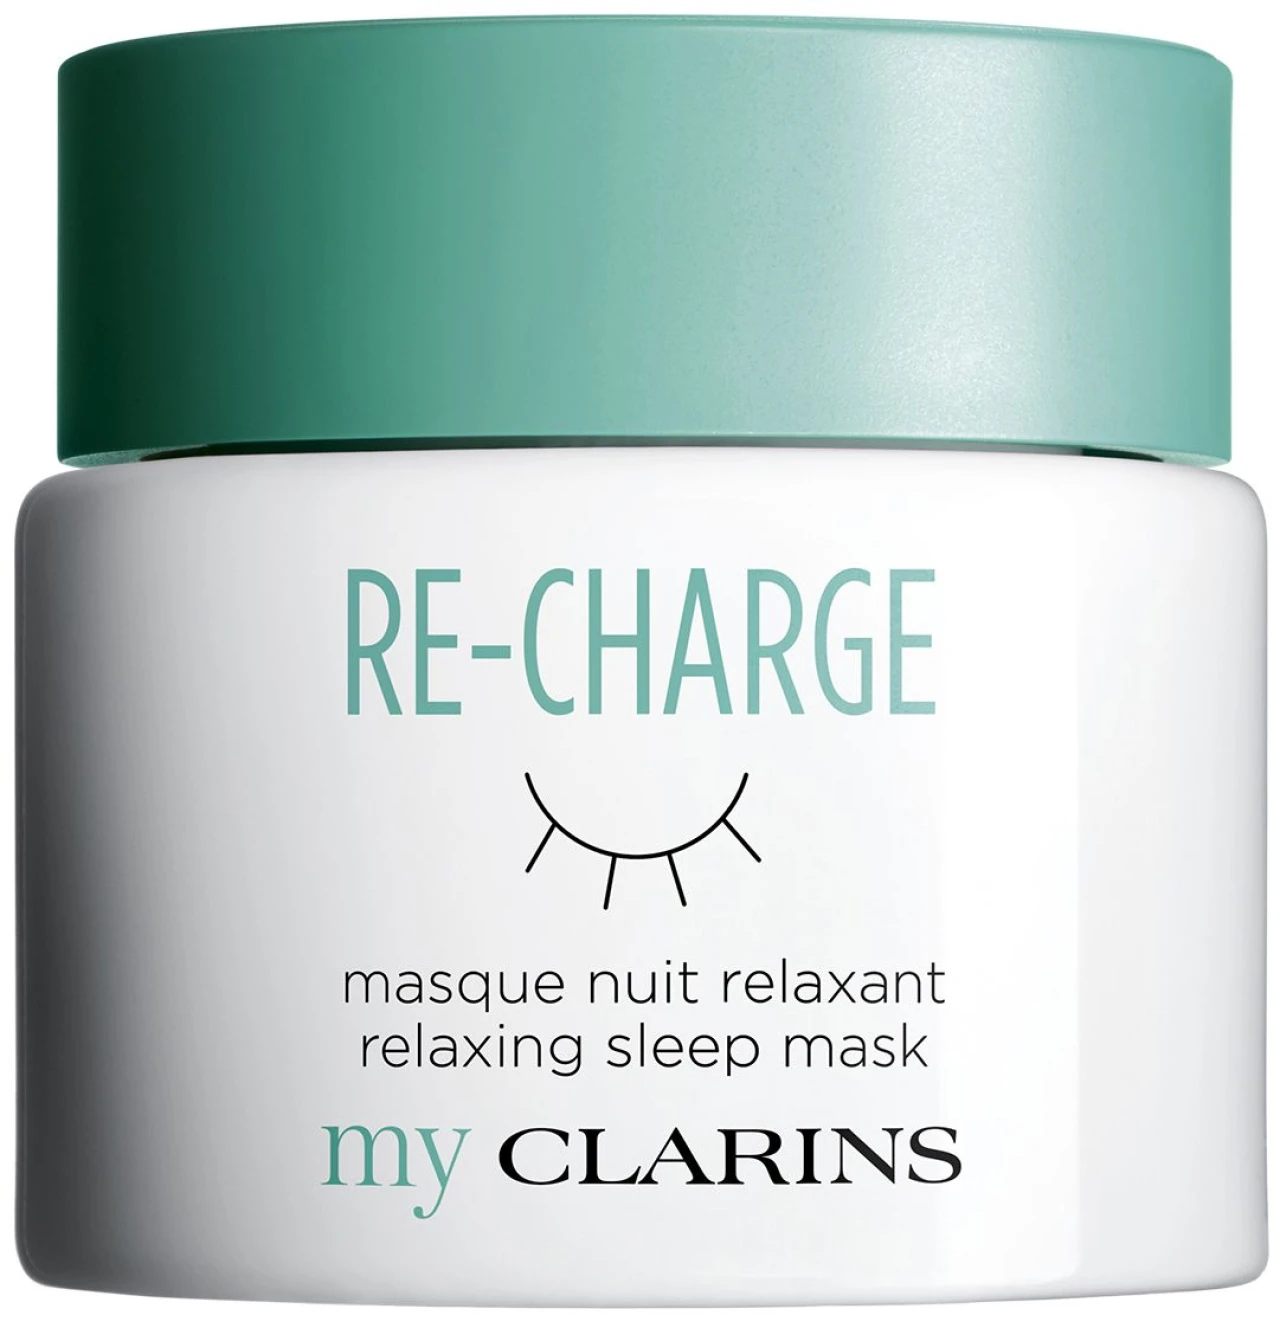 Clarins Myclarins Re-Charge Relaxing Sleep Mask